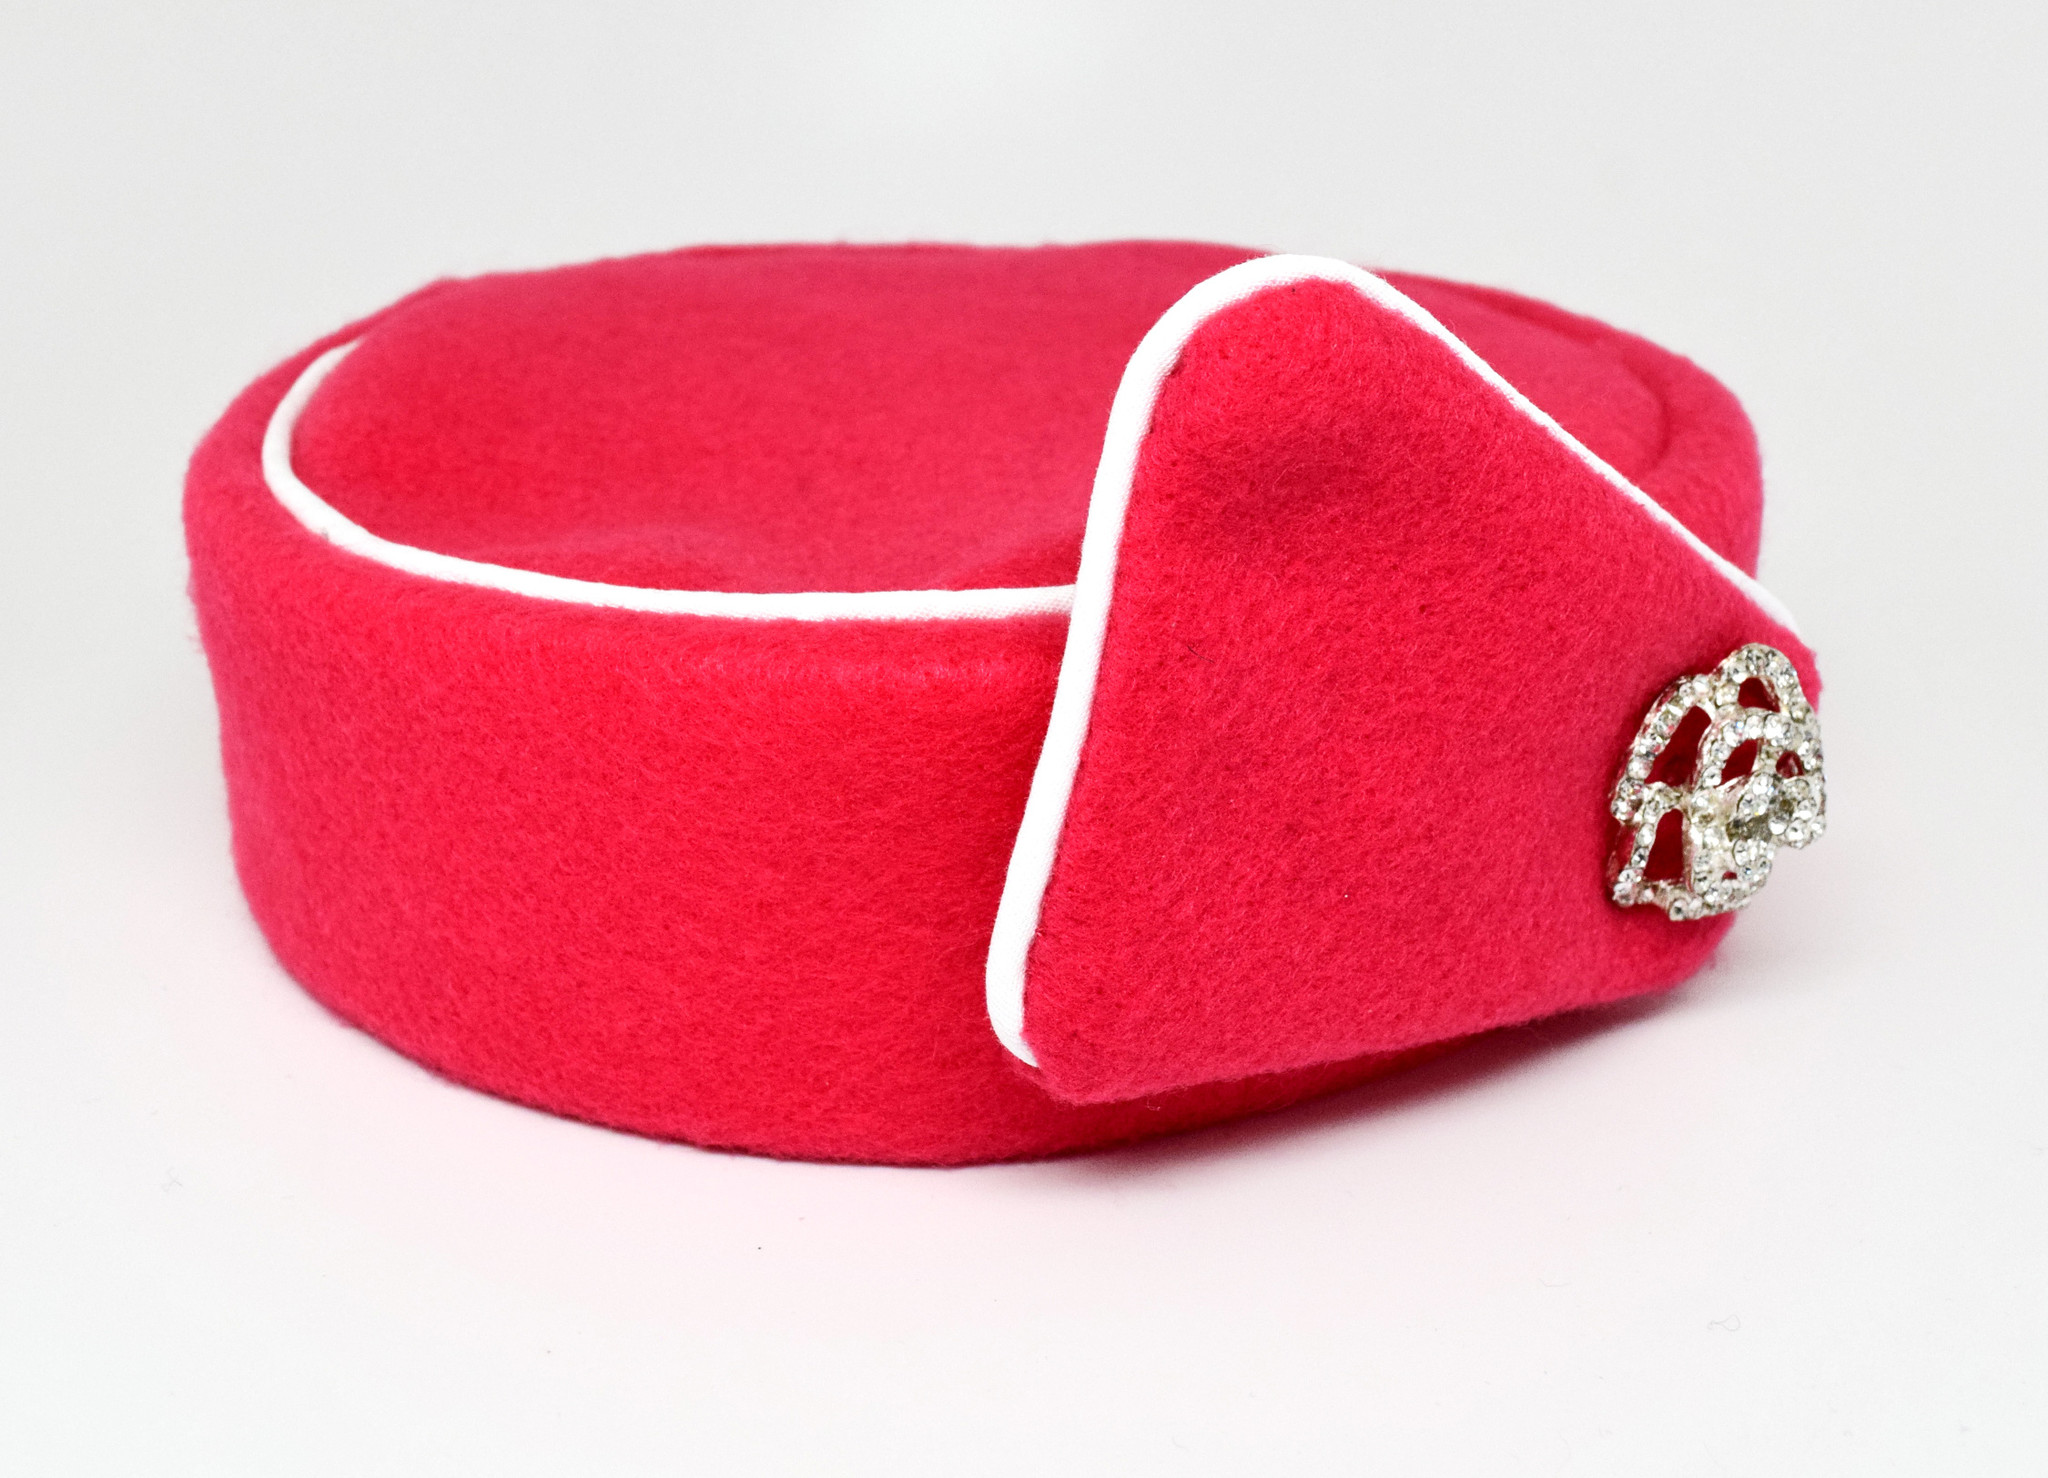 Stewardess Style Vintage Inspired Oval Pillbox Hat in 10 Colors